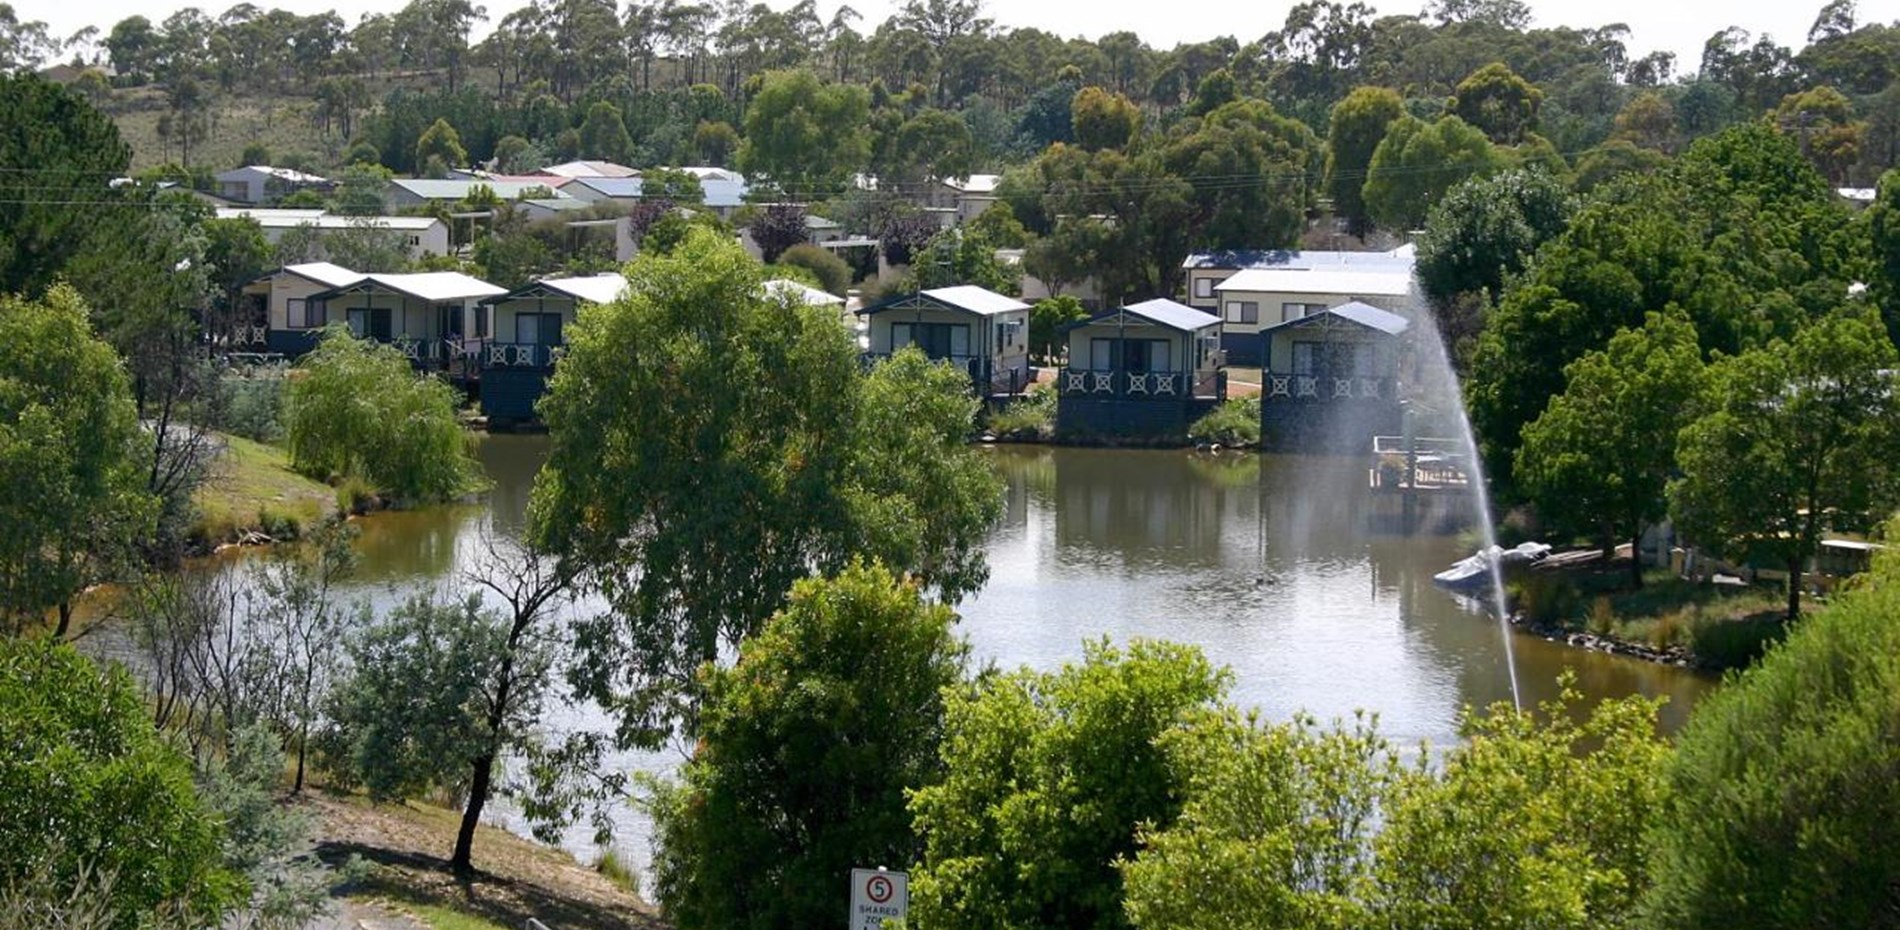 FUNDING BOOST TO SUPPORT UPGRADES AND NEW FACILITIES AT EDEN-MONARO CARAVAN PARKS Main Image